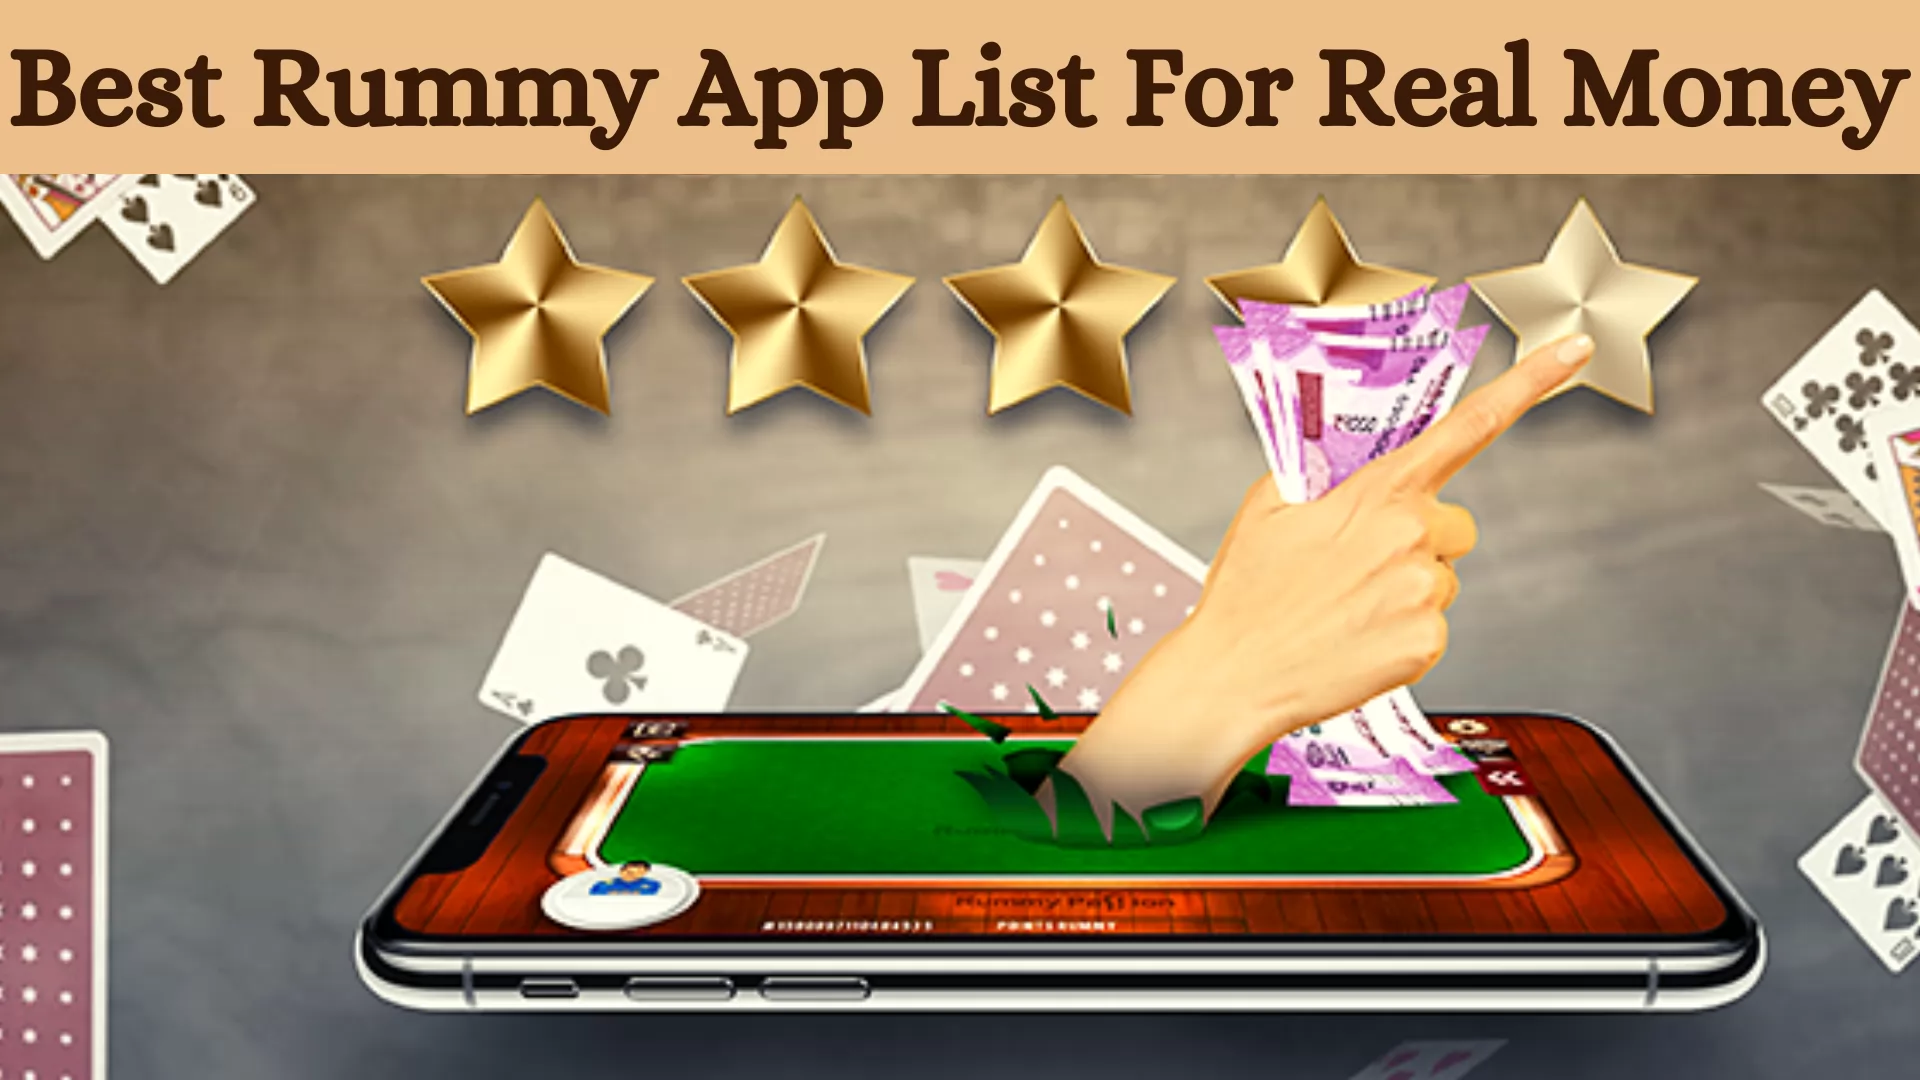 Rummy App  Benefits of iOS & Android Rummy App - Playship